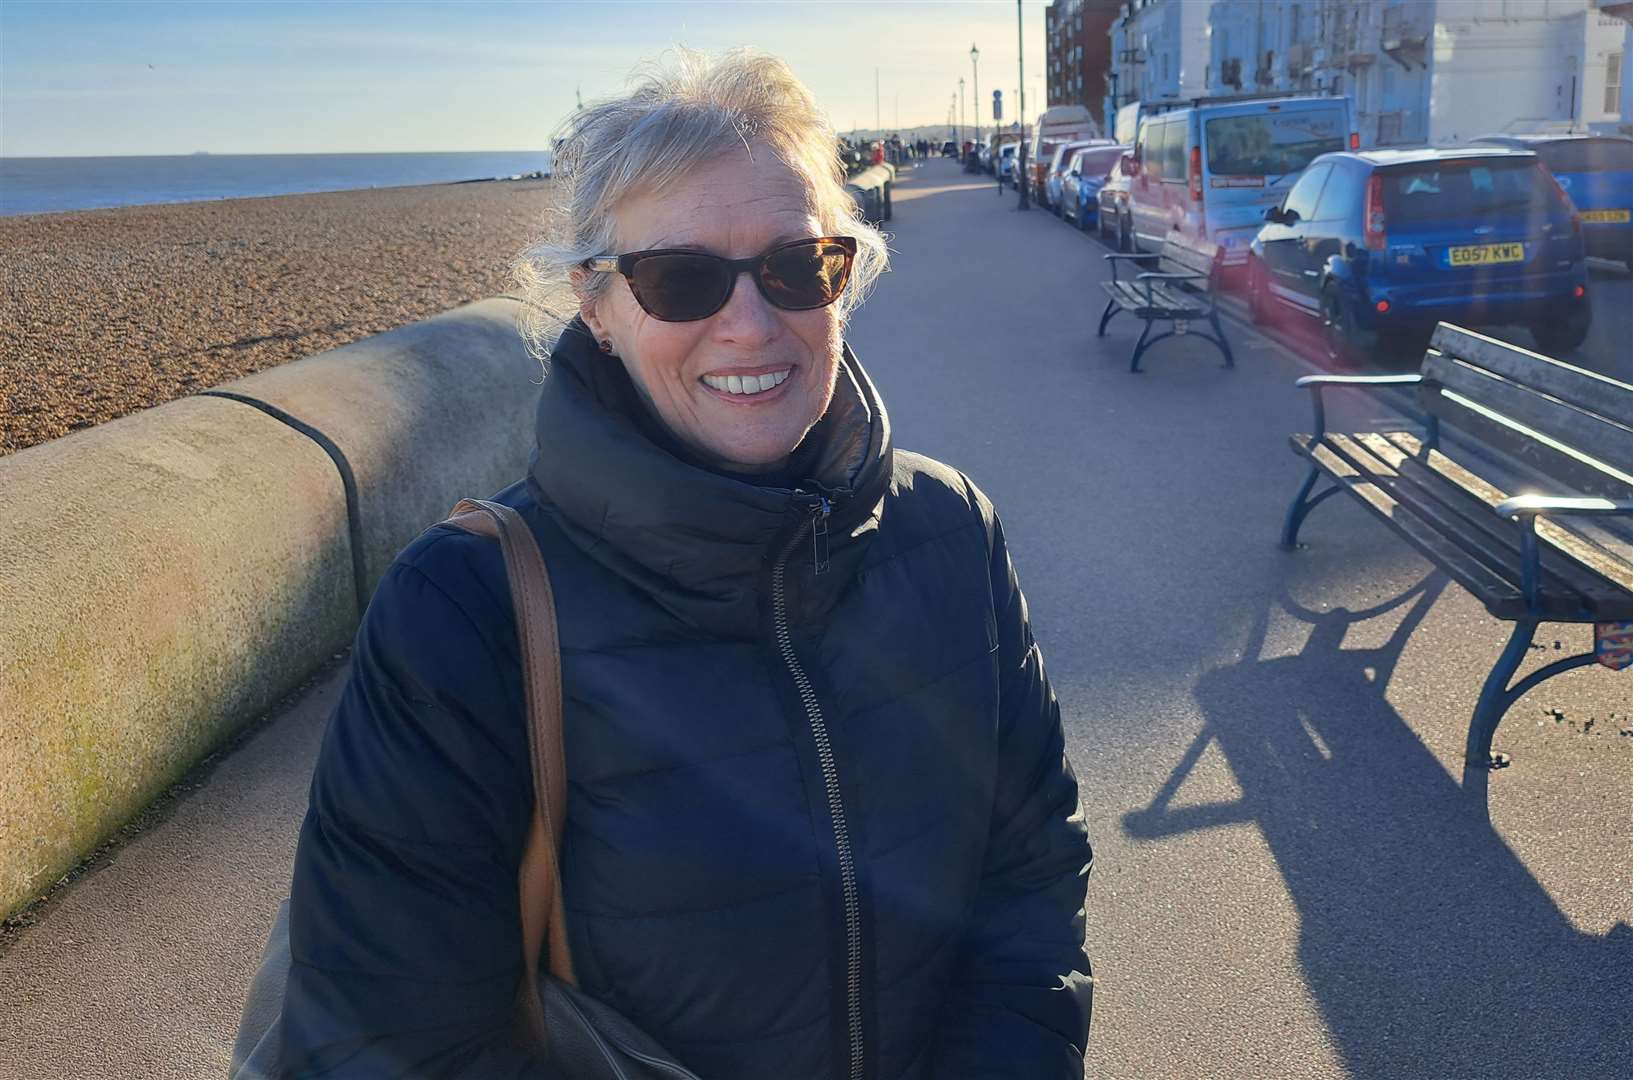 Tricia Grist had a near-miss with a cyclist on Deal seafront